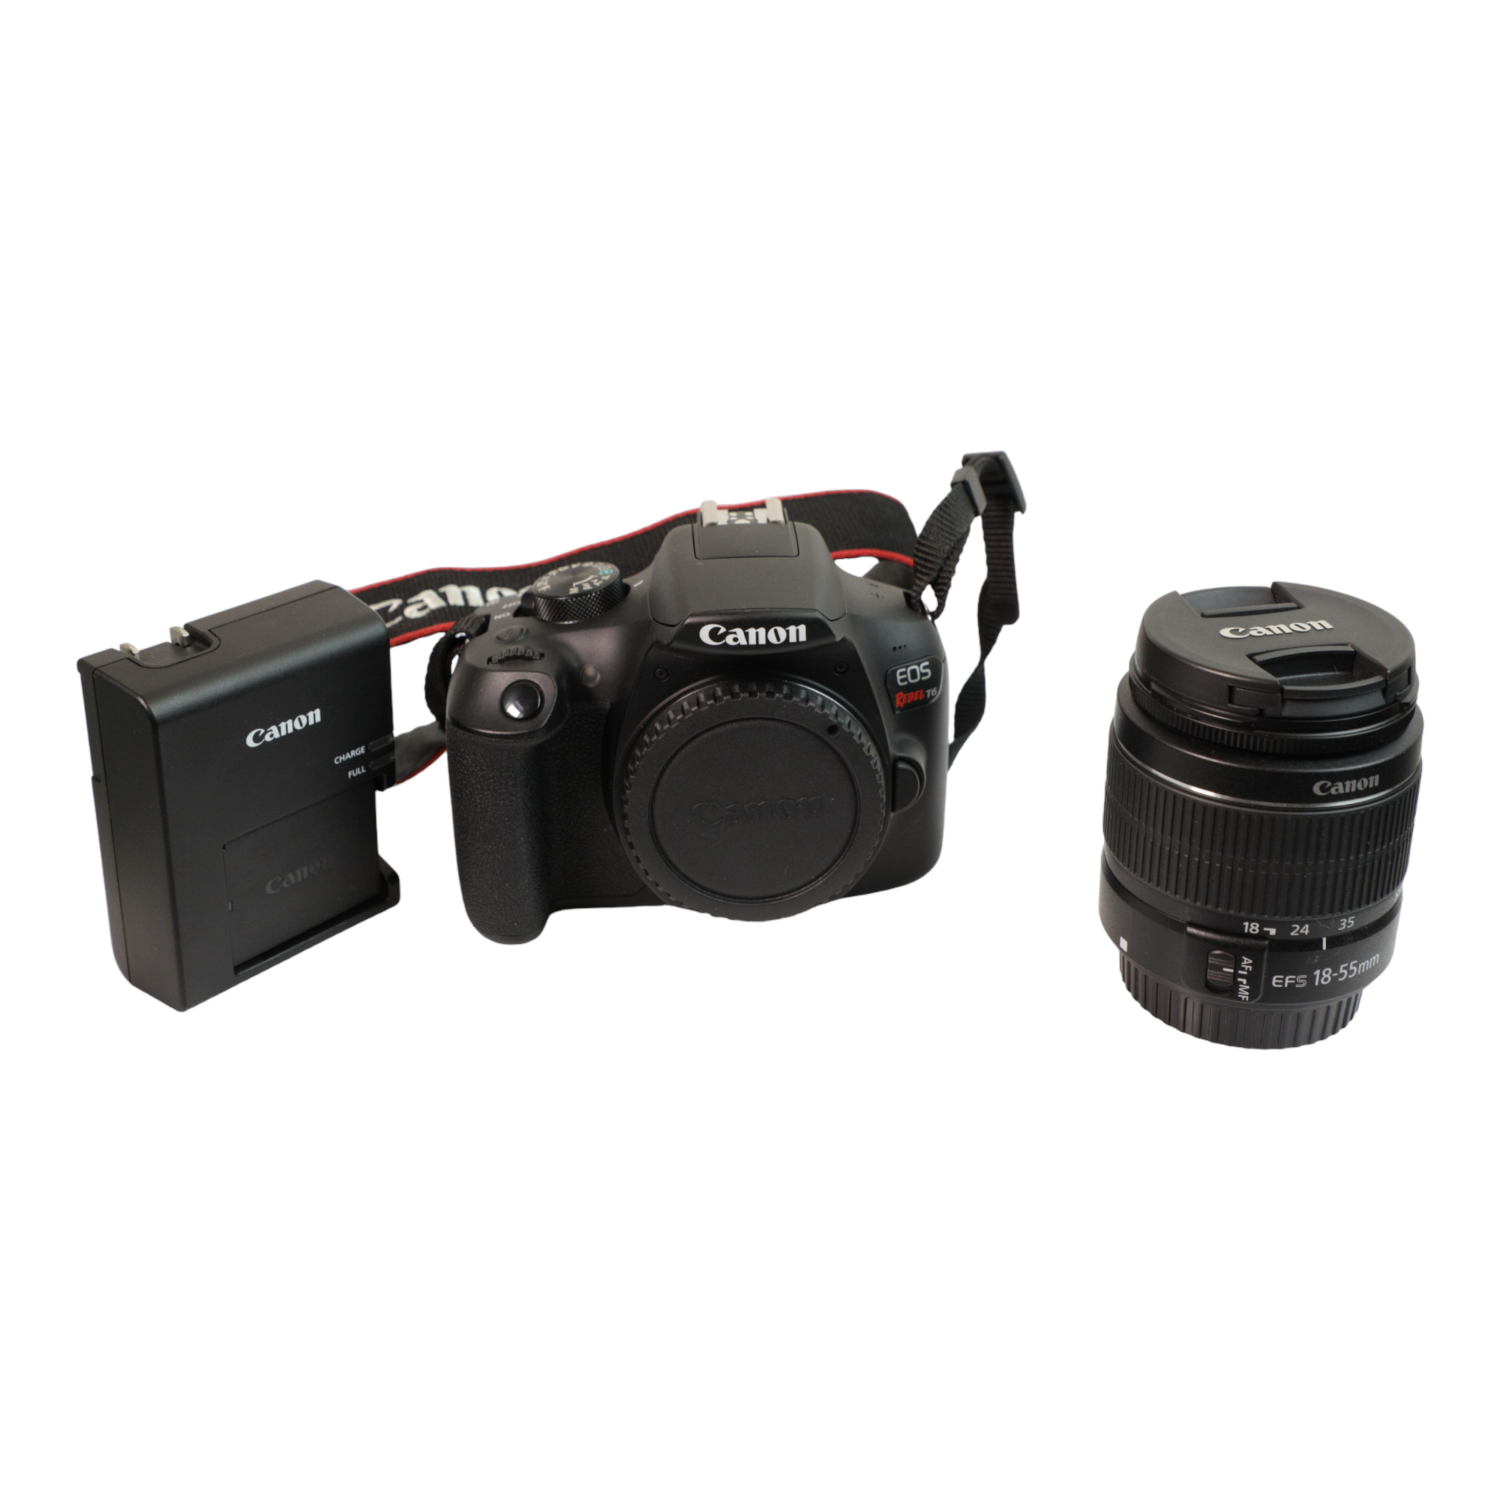 Refurbished(Excellent) - Canon EOS Rebel T6 DSLR Camera with 18-55mm f/3.5-5.6 IS III Kit Lens